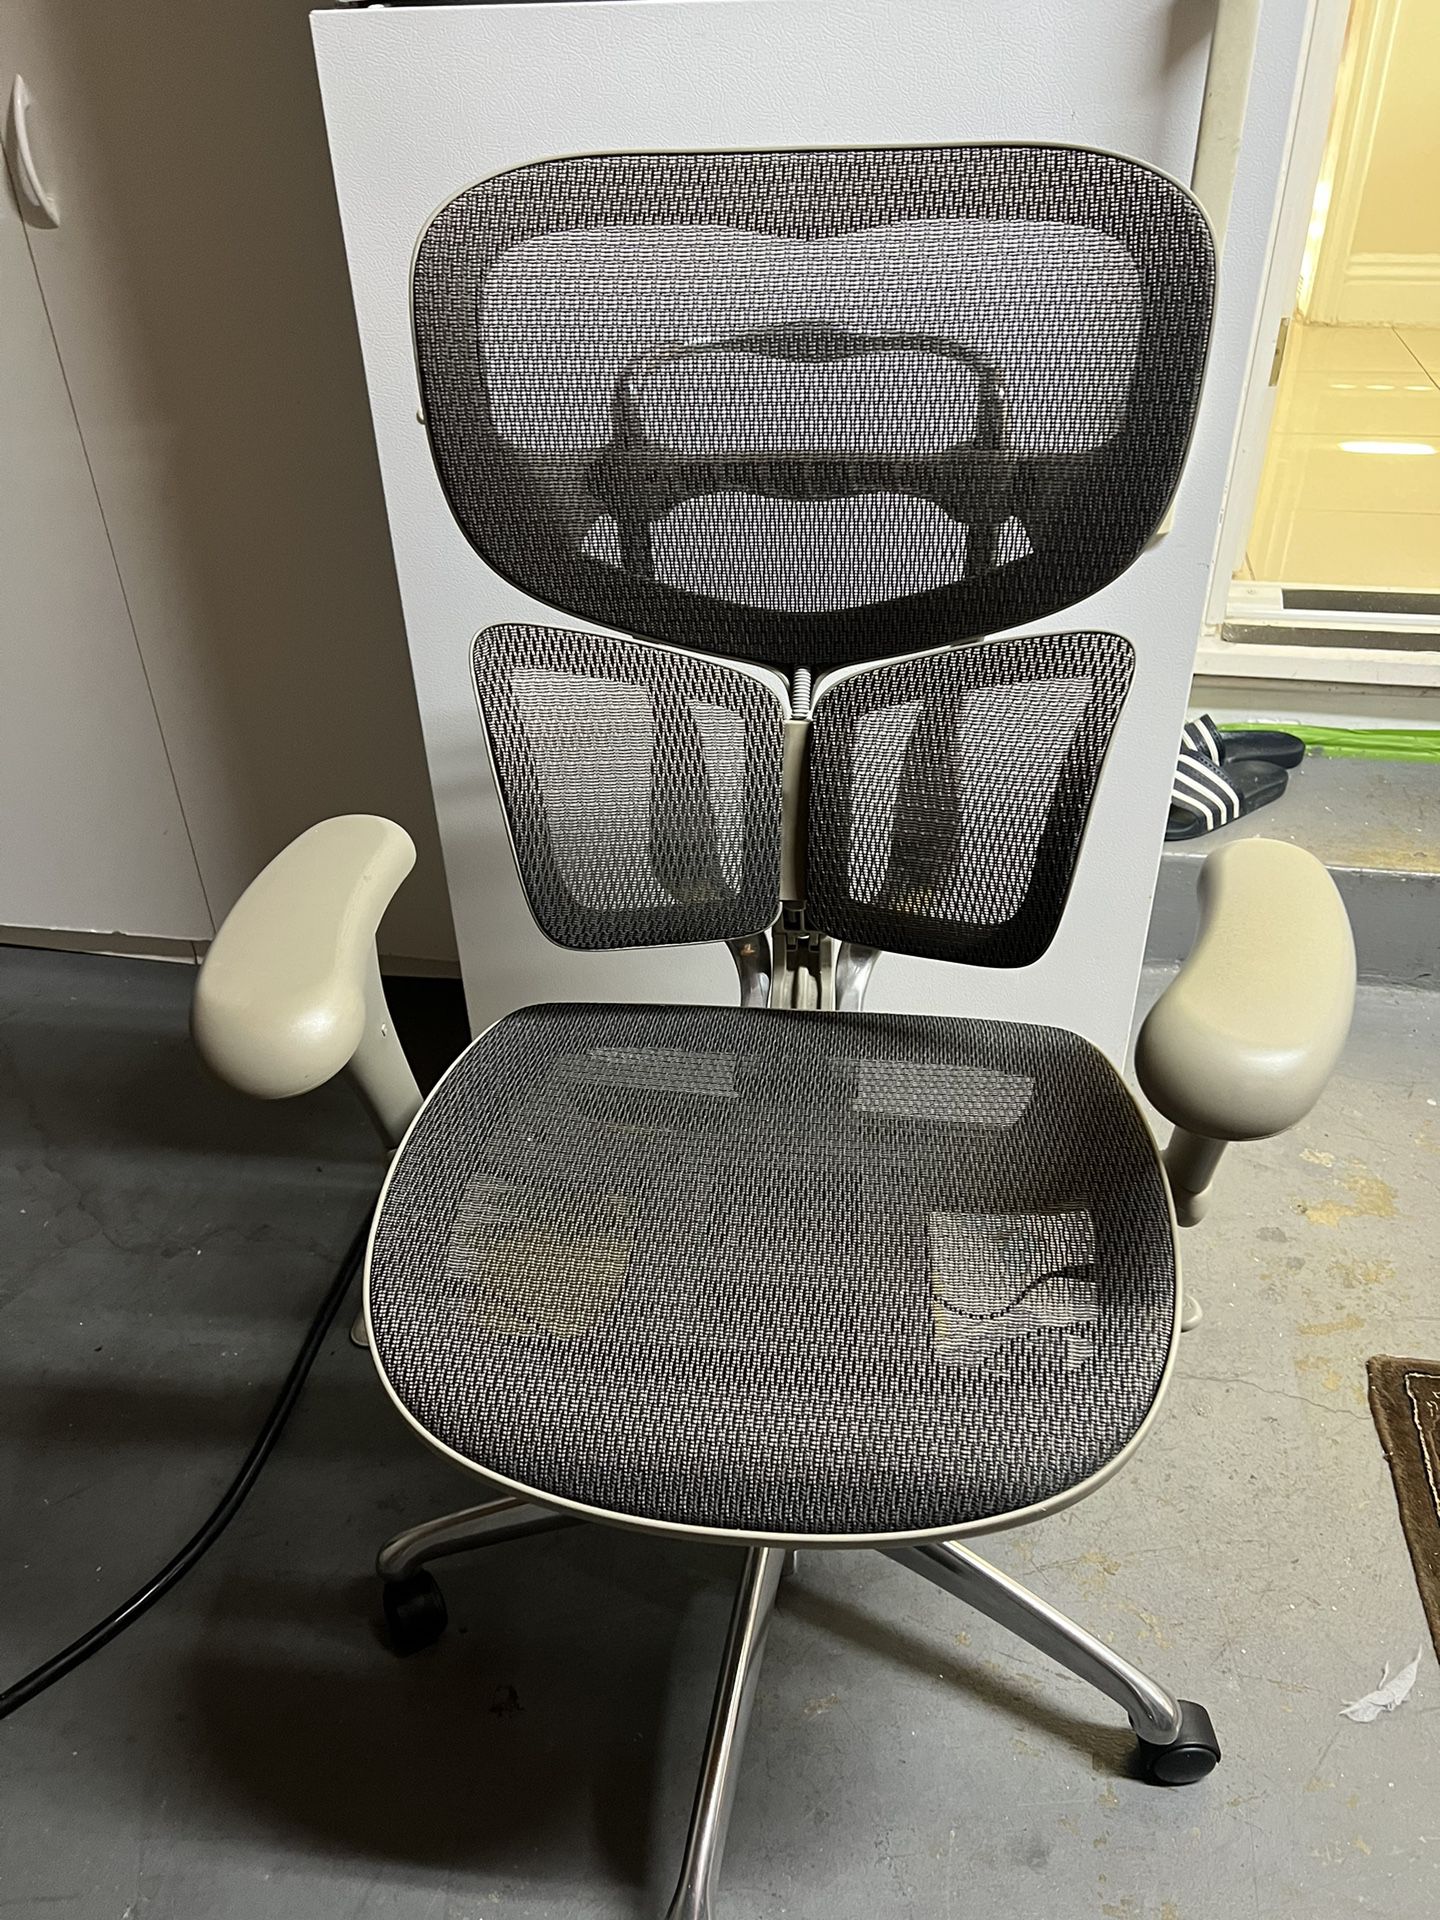 Professional Office Chair 